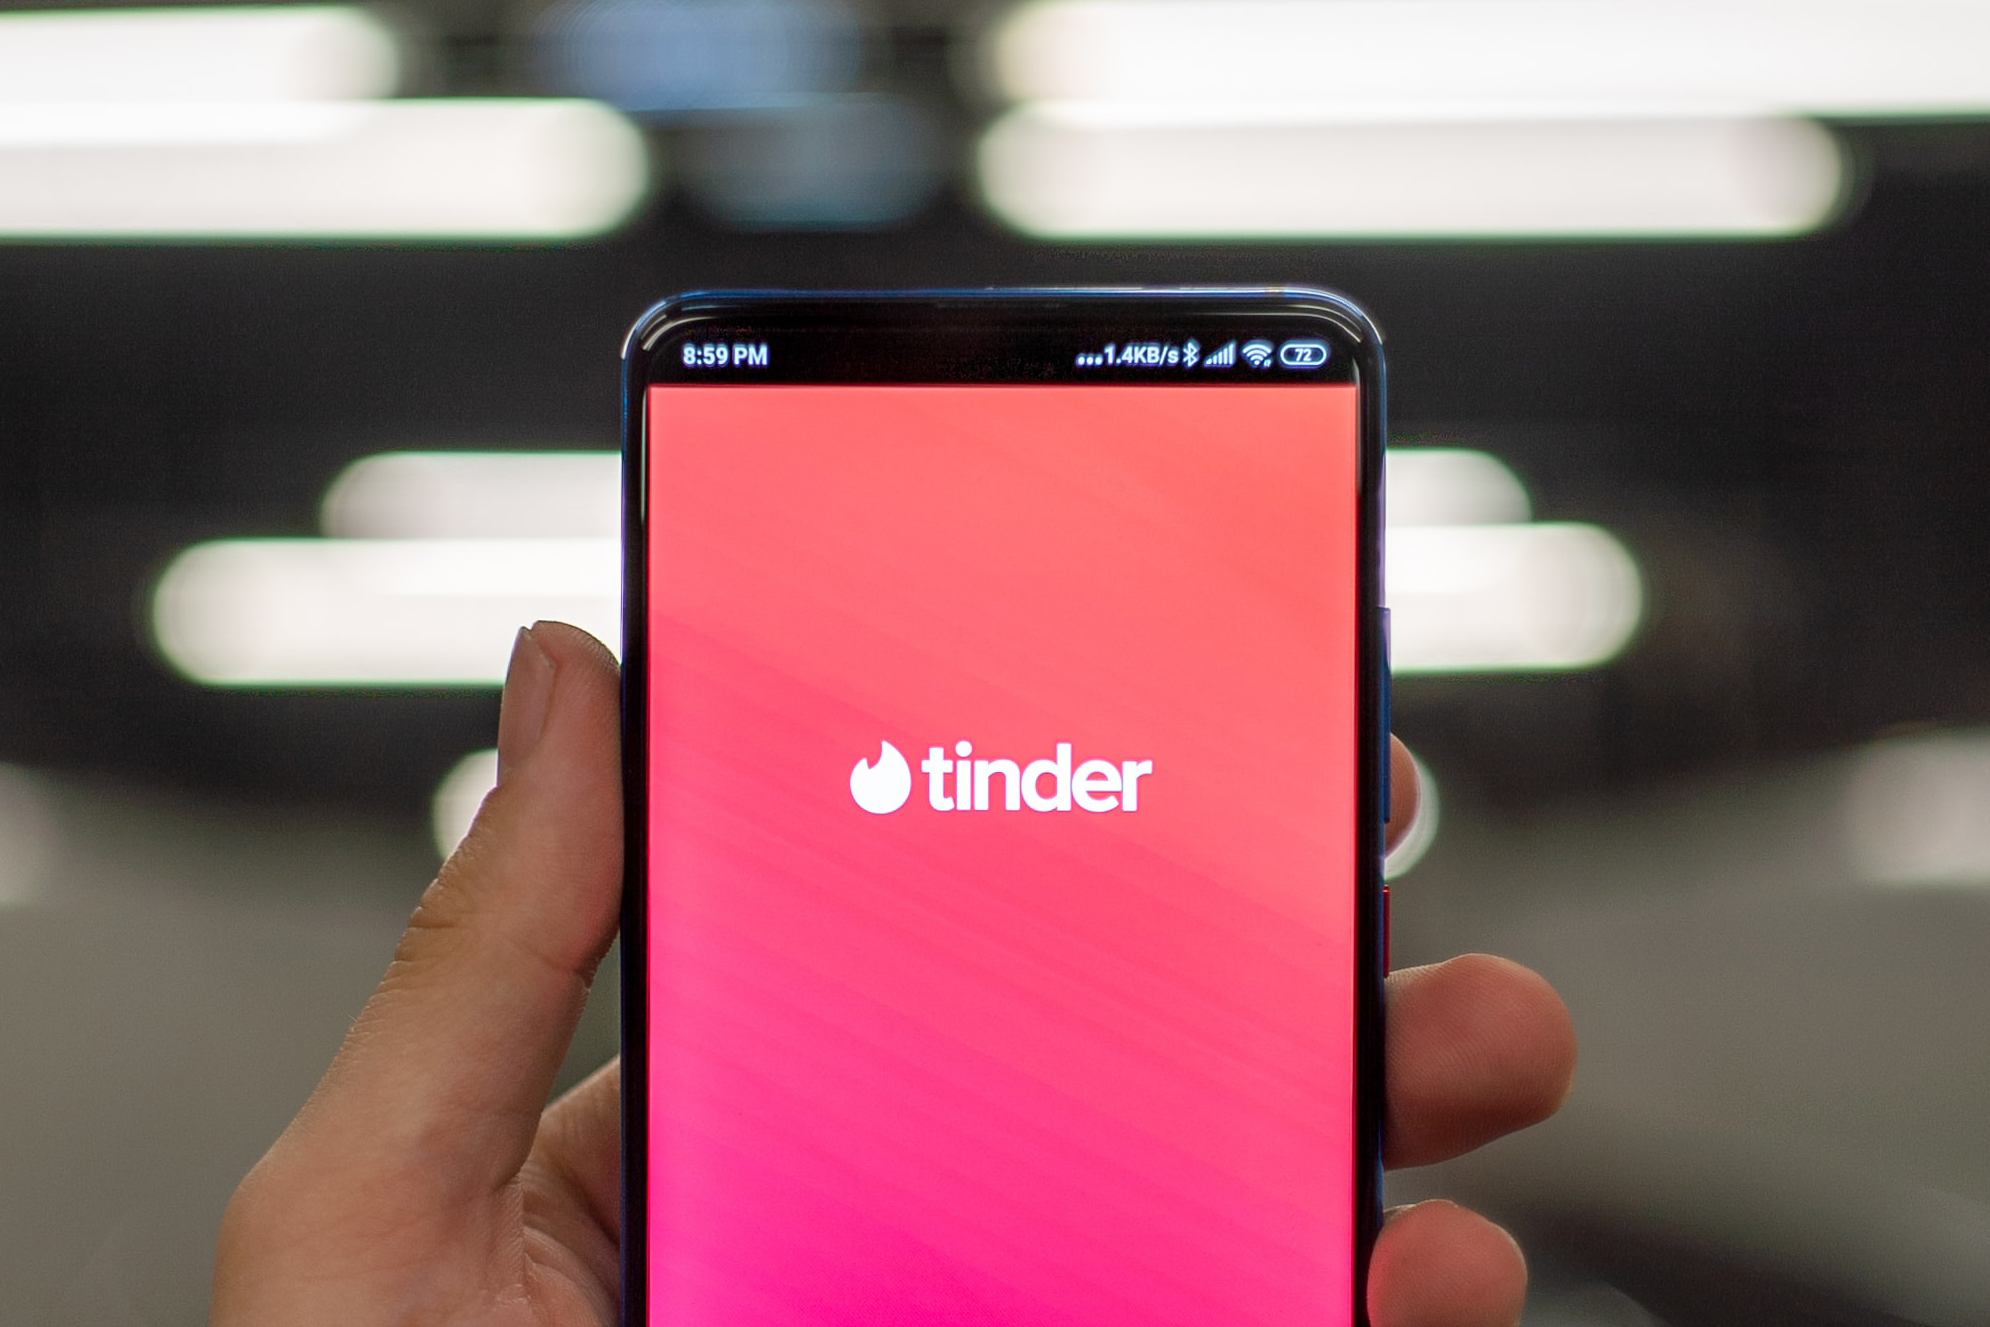 Tinder only got likes on the first day